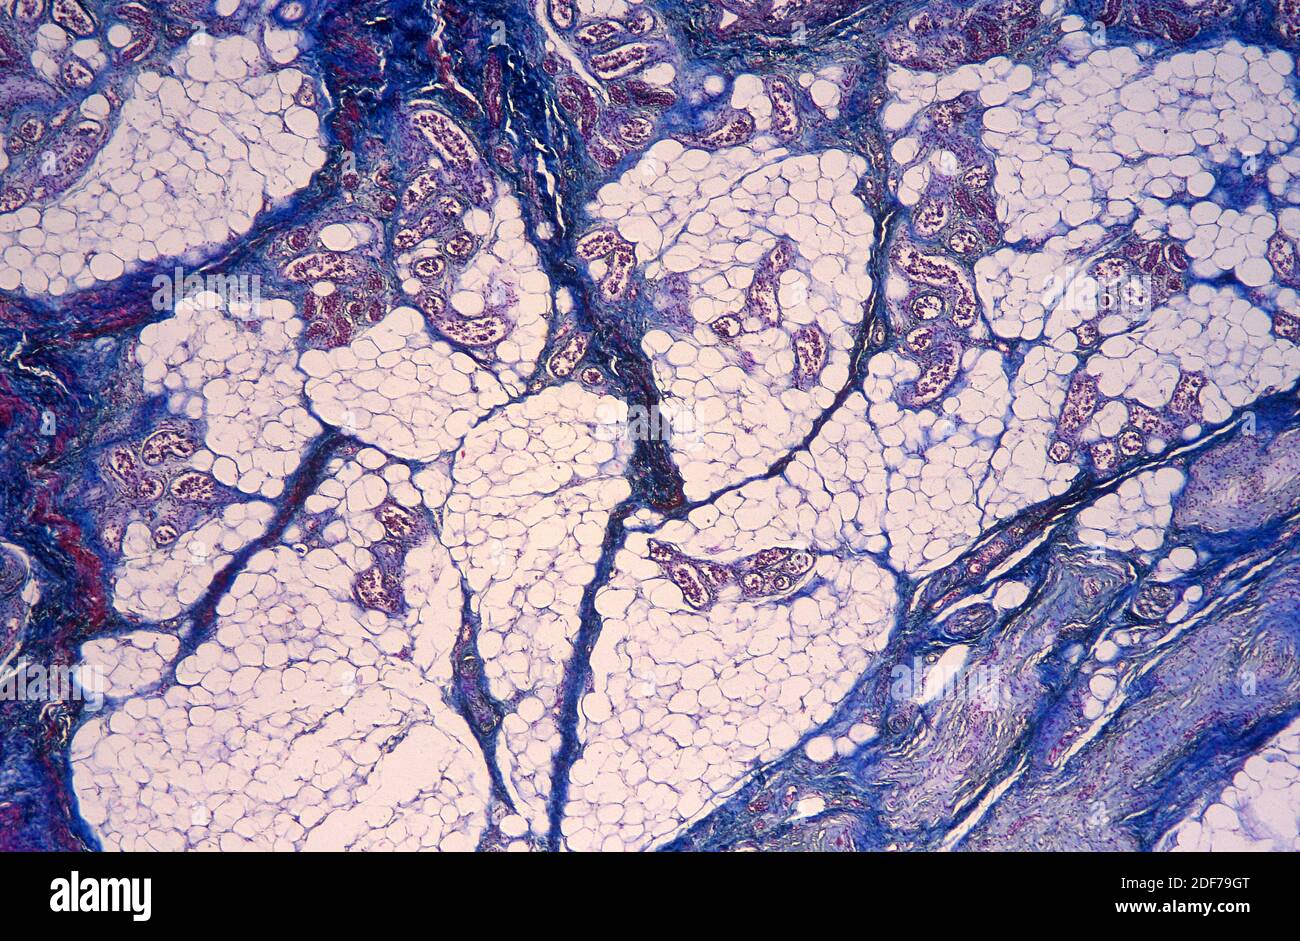 Adipose tissue with blood vessels. Photomicrograph. Stock Photo